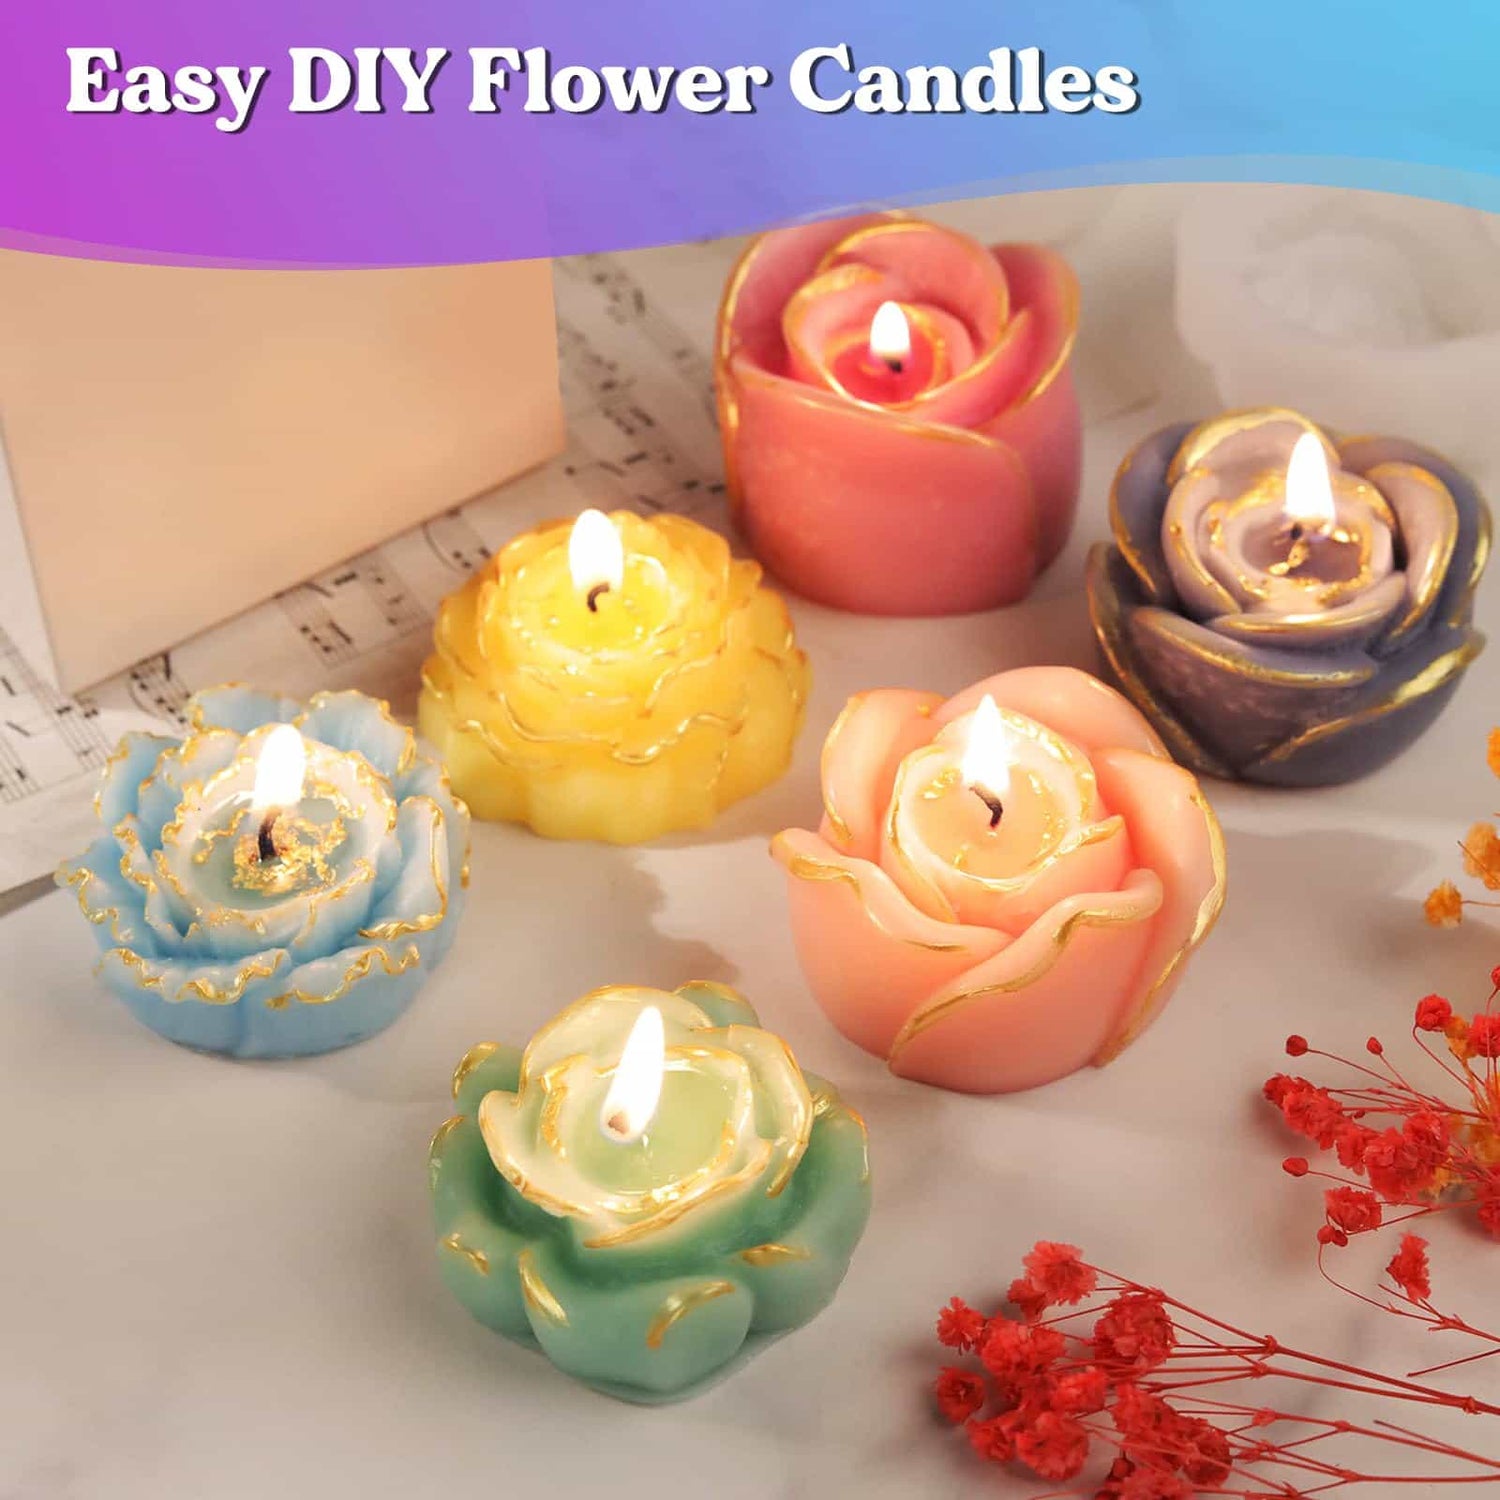 LET'S RESIN Tealight Candle Holder Resin Molds, Set of 3 Candle